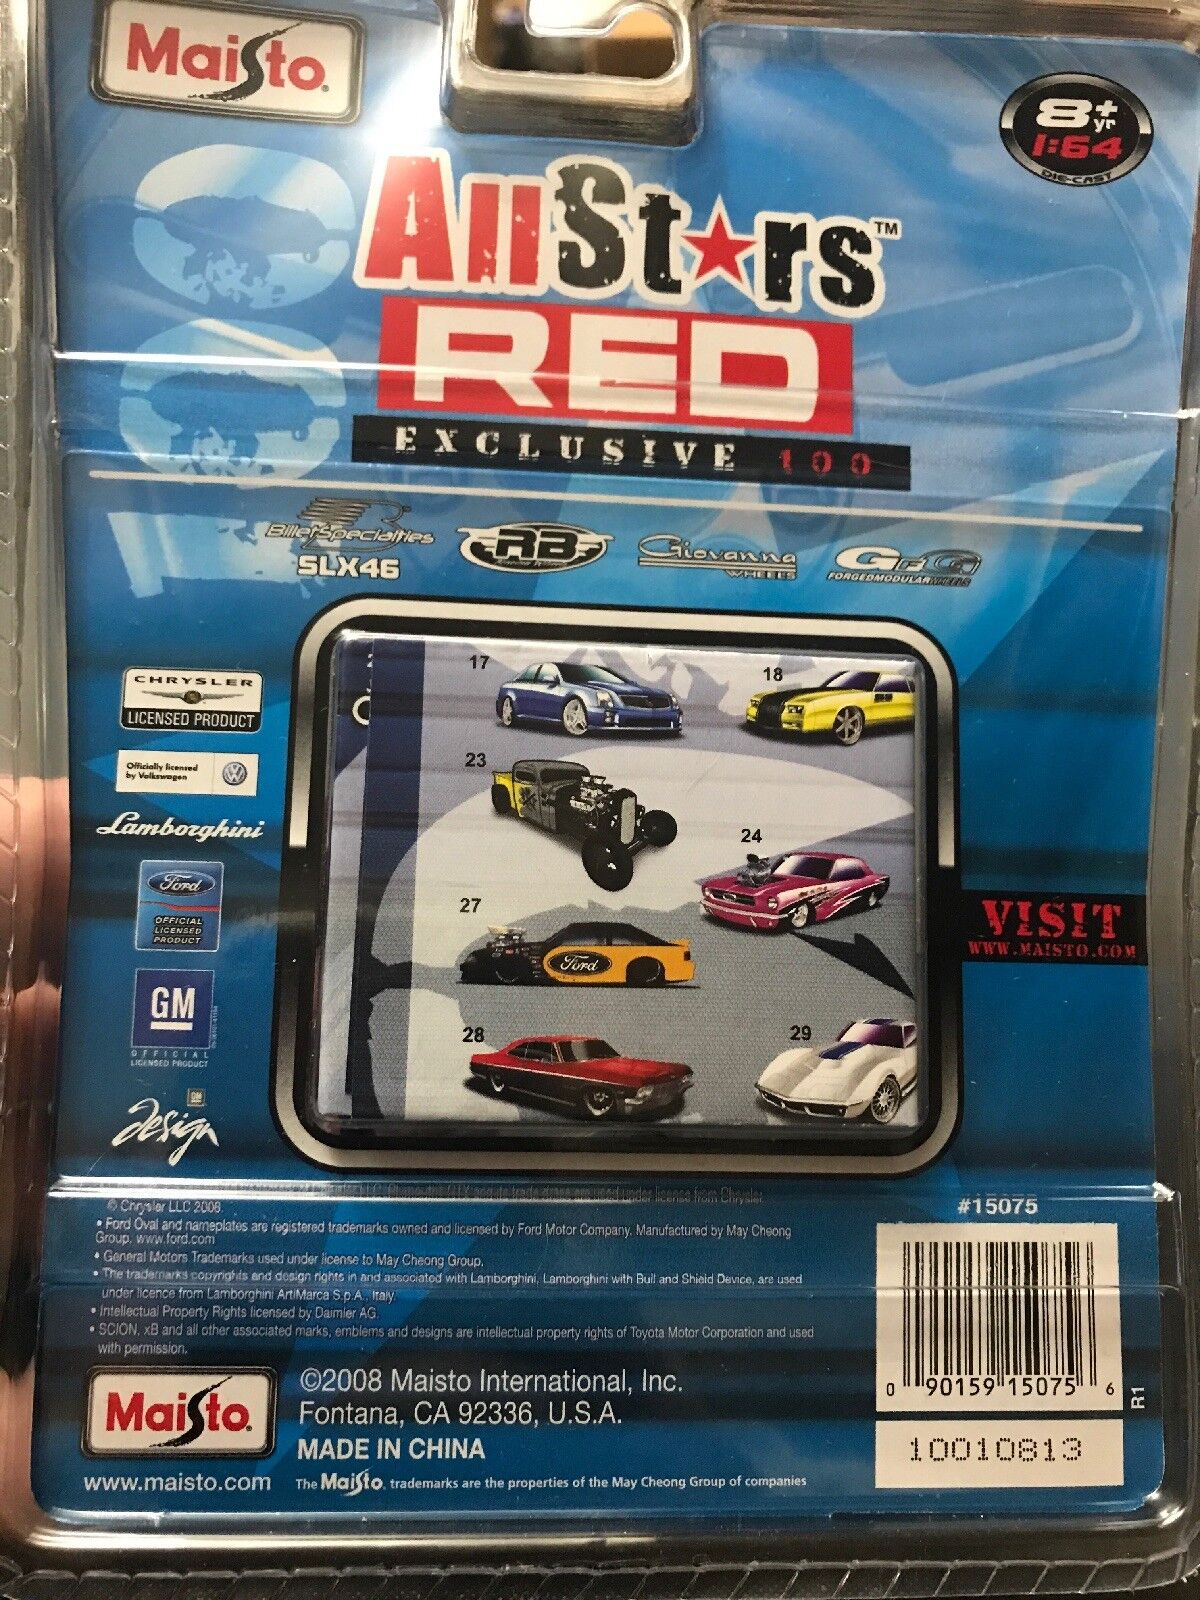 MAISTO All Stars Red Exc. 100 - 1/64 - 1932 Ford Roadster (blue/Black  Flames)NIP